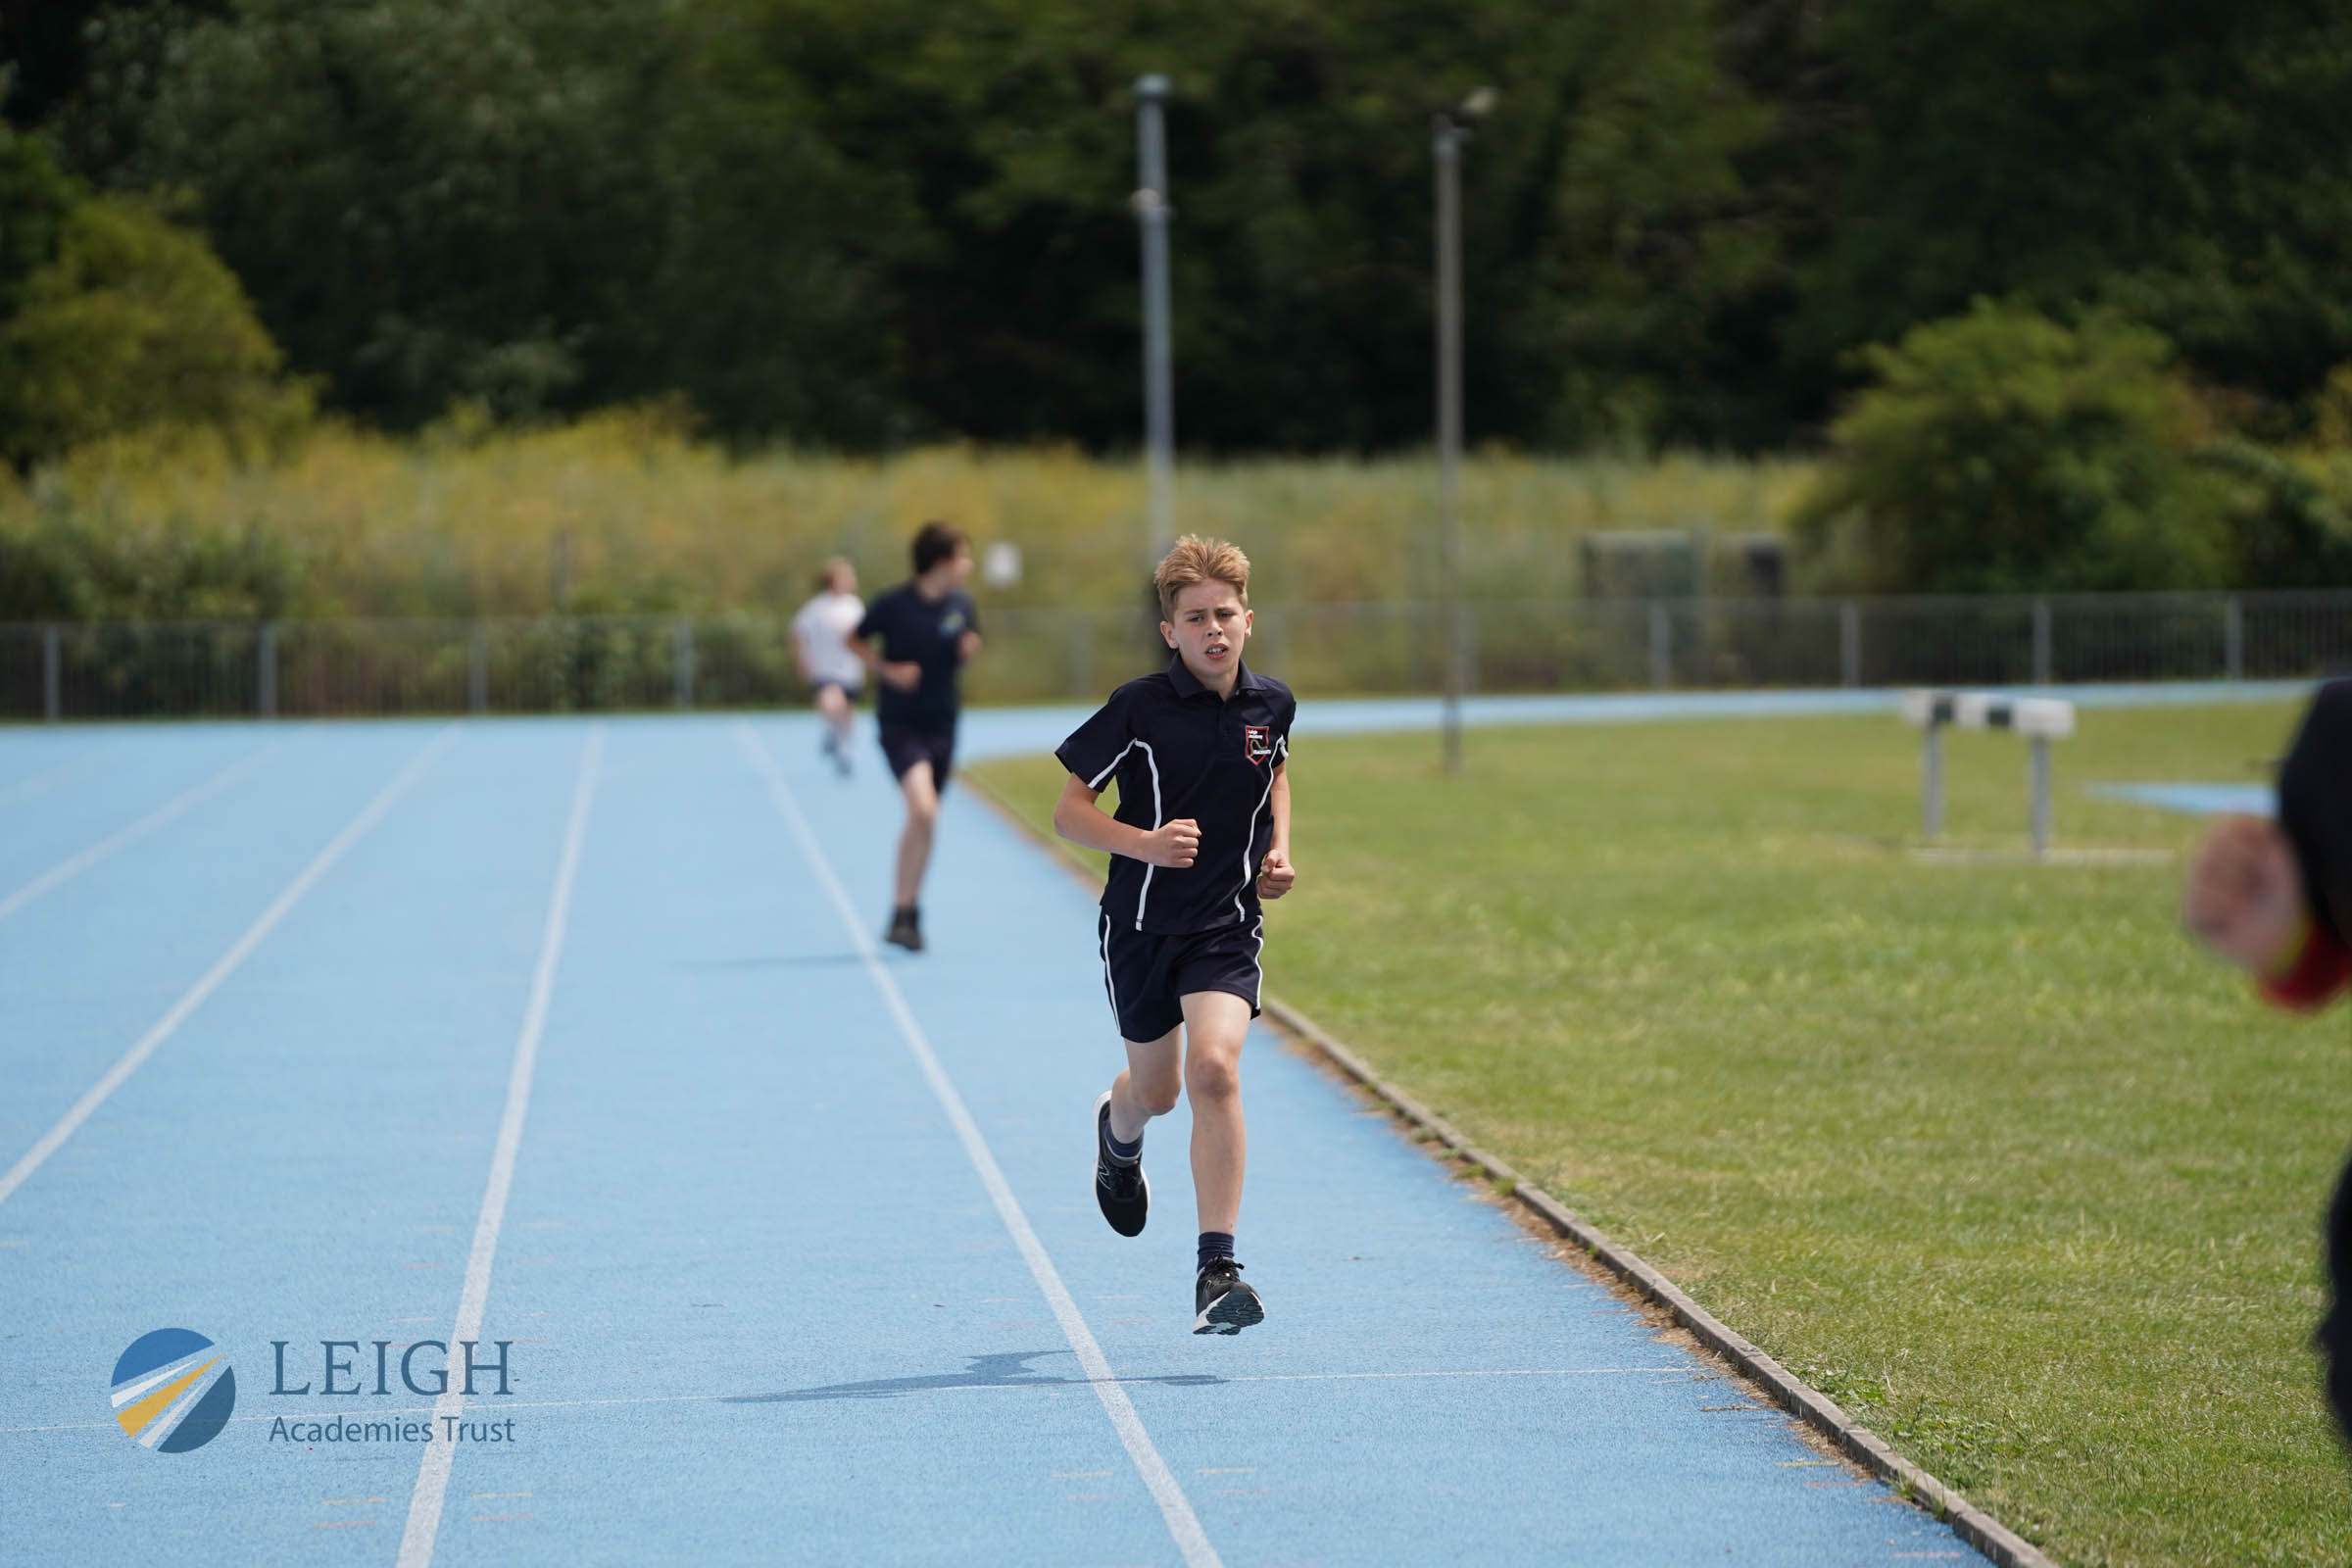 BBA01105-LAT-Secondary-SportsDay-LowRes